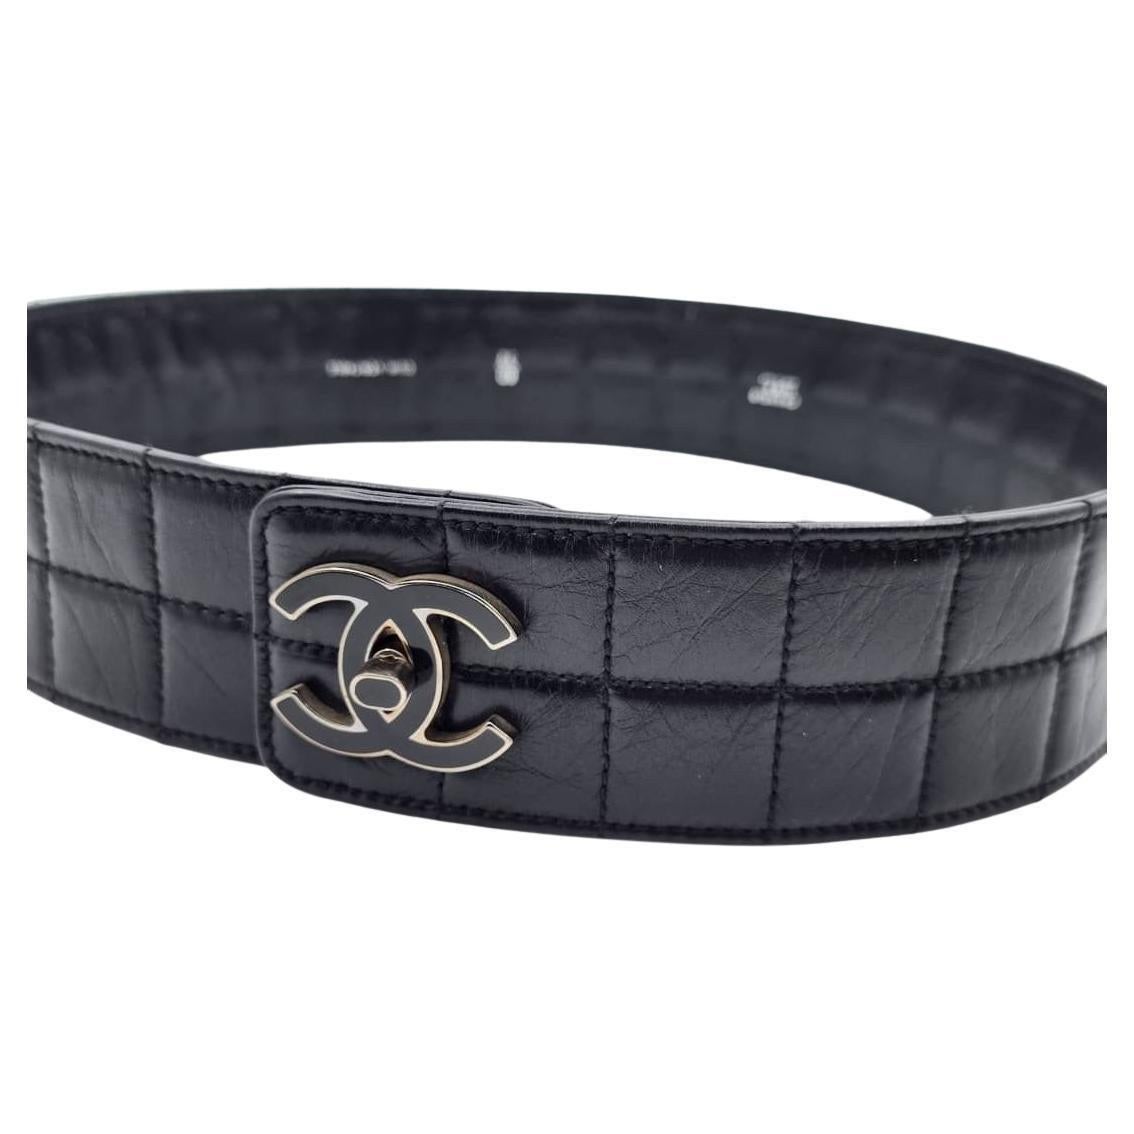 This vintage Chanel chocolate bar belt is crafted of lambskin leather in square quilted pattern featuring a black enameled silver toned CC turnlock. Stamped Chanel 02P made in Italy. Size 80/32. Fits waist up to 31 inches Width 2 inches. 

Condition